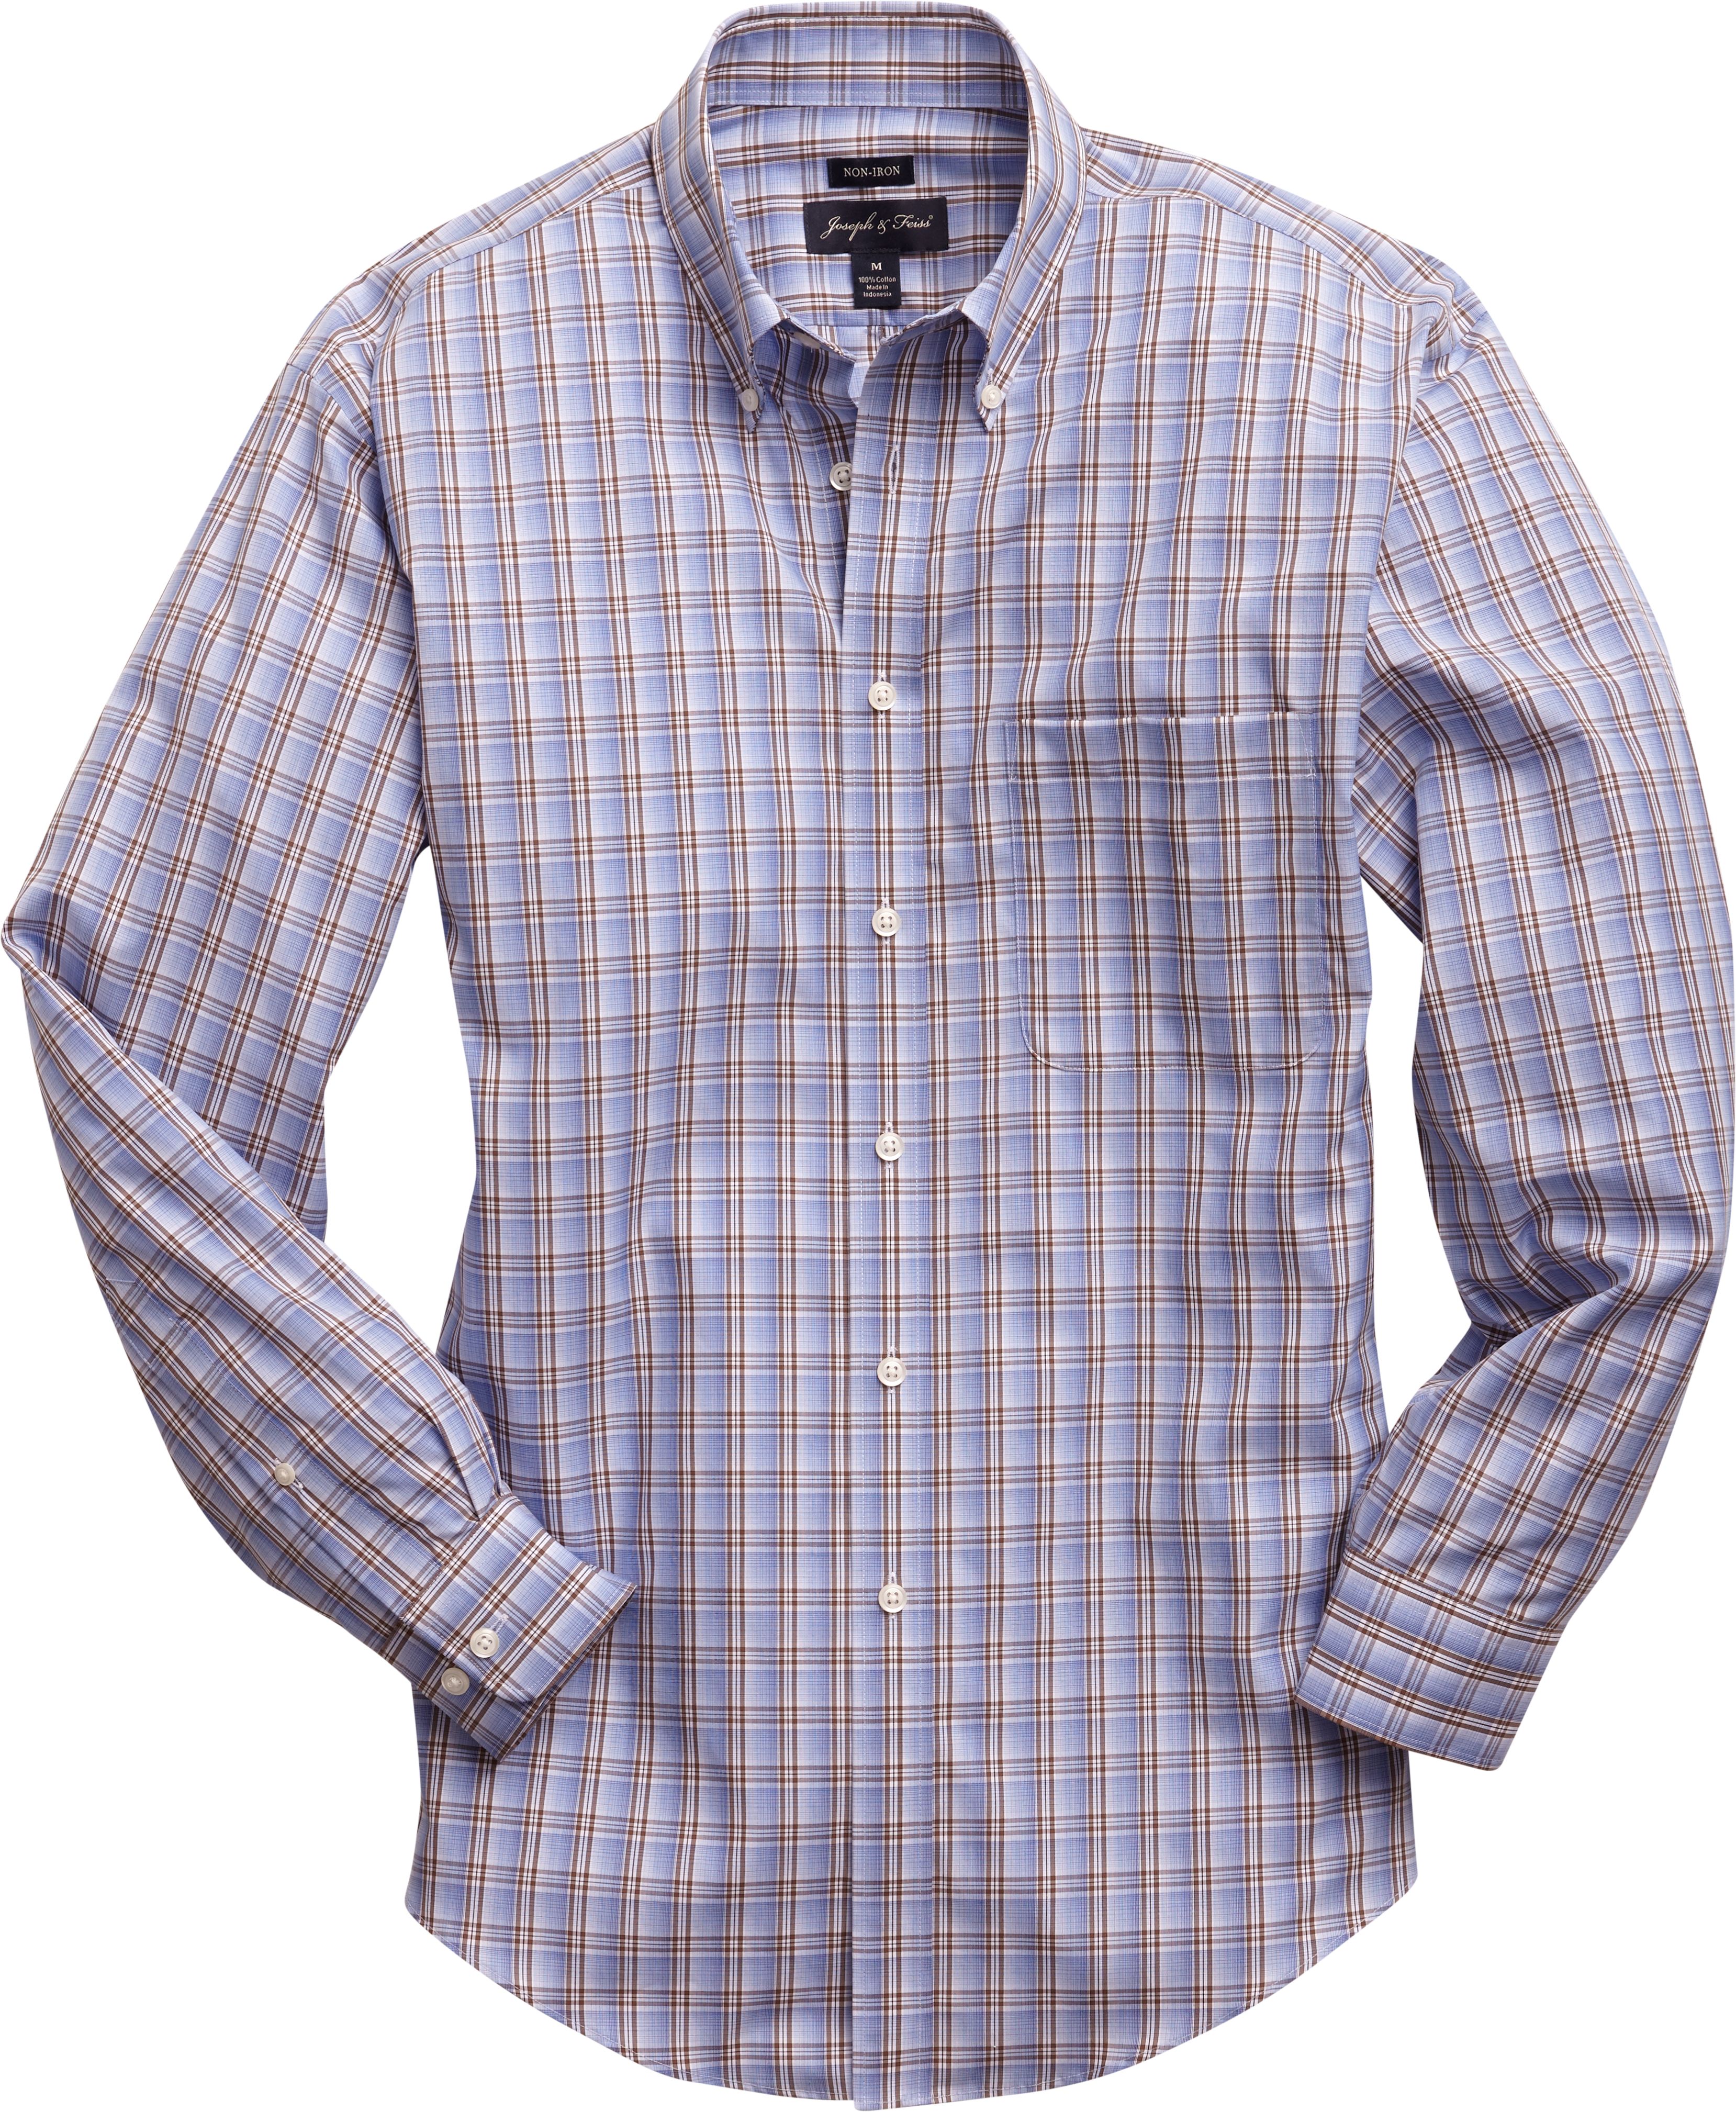 Joseph & Feiss Blue and Chocolate Brown Plaid Button-Down Slim Fit ...